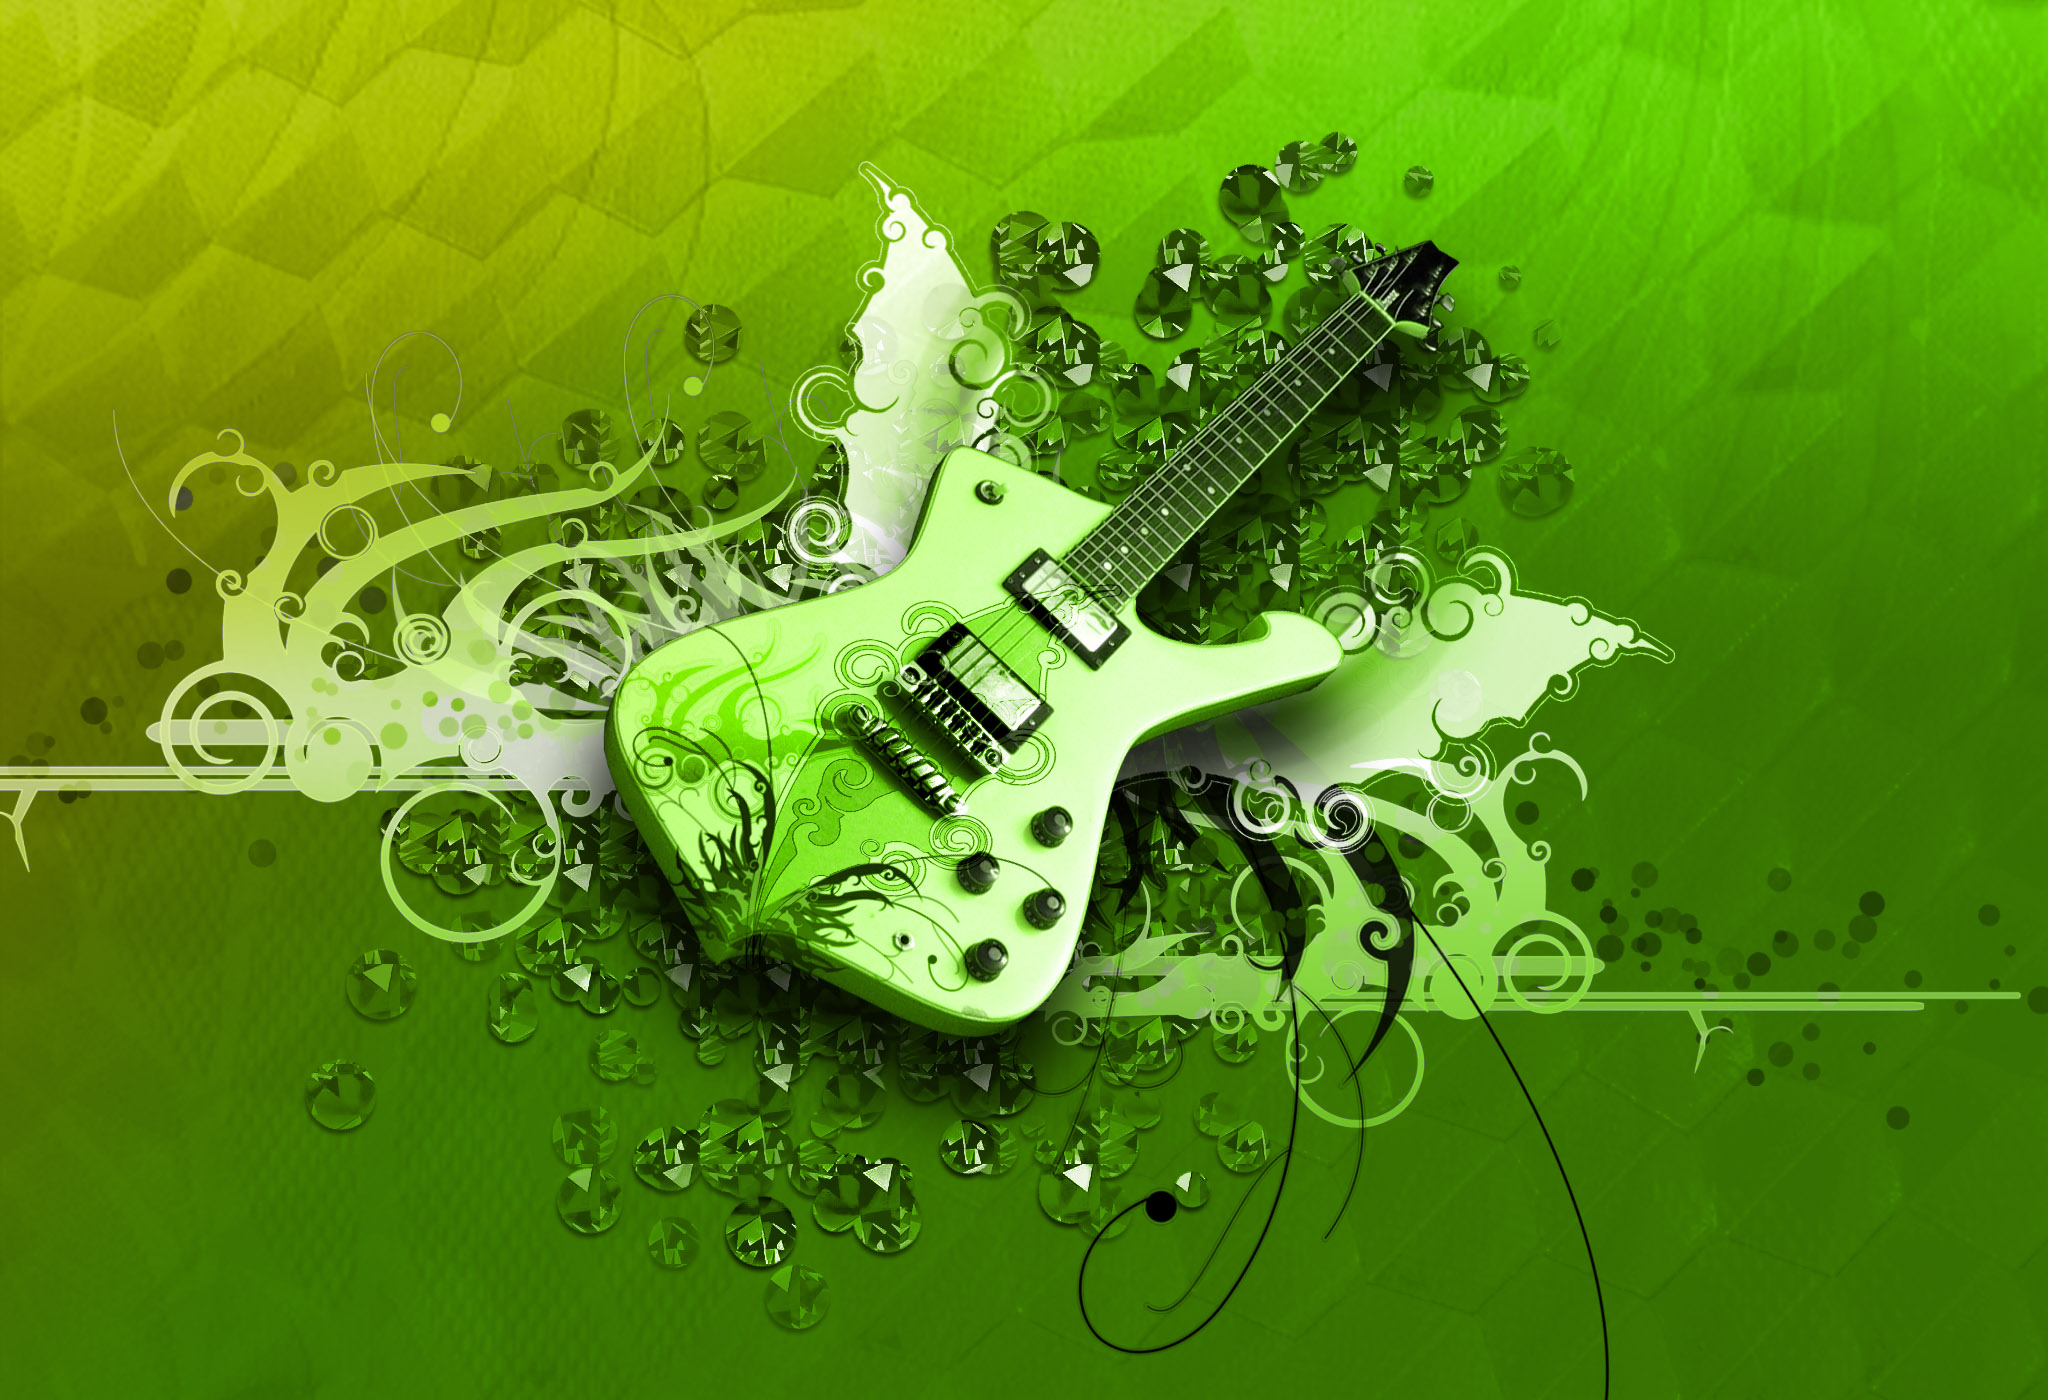 Abstract Guitar Wallpapers On Wallpaper Hd - Green Guitar Wallpaper Hd , HD Wallpaper & Backgrounds